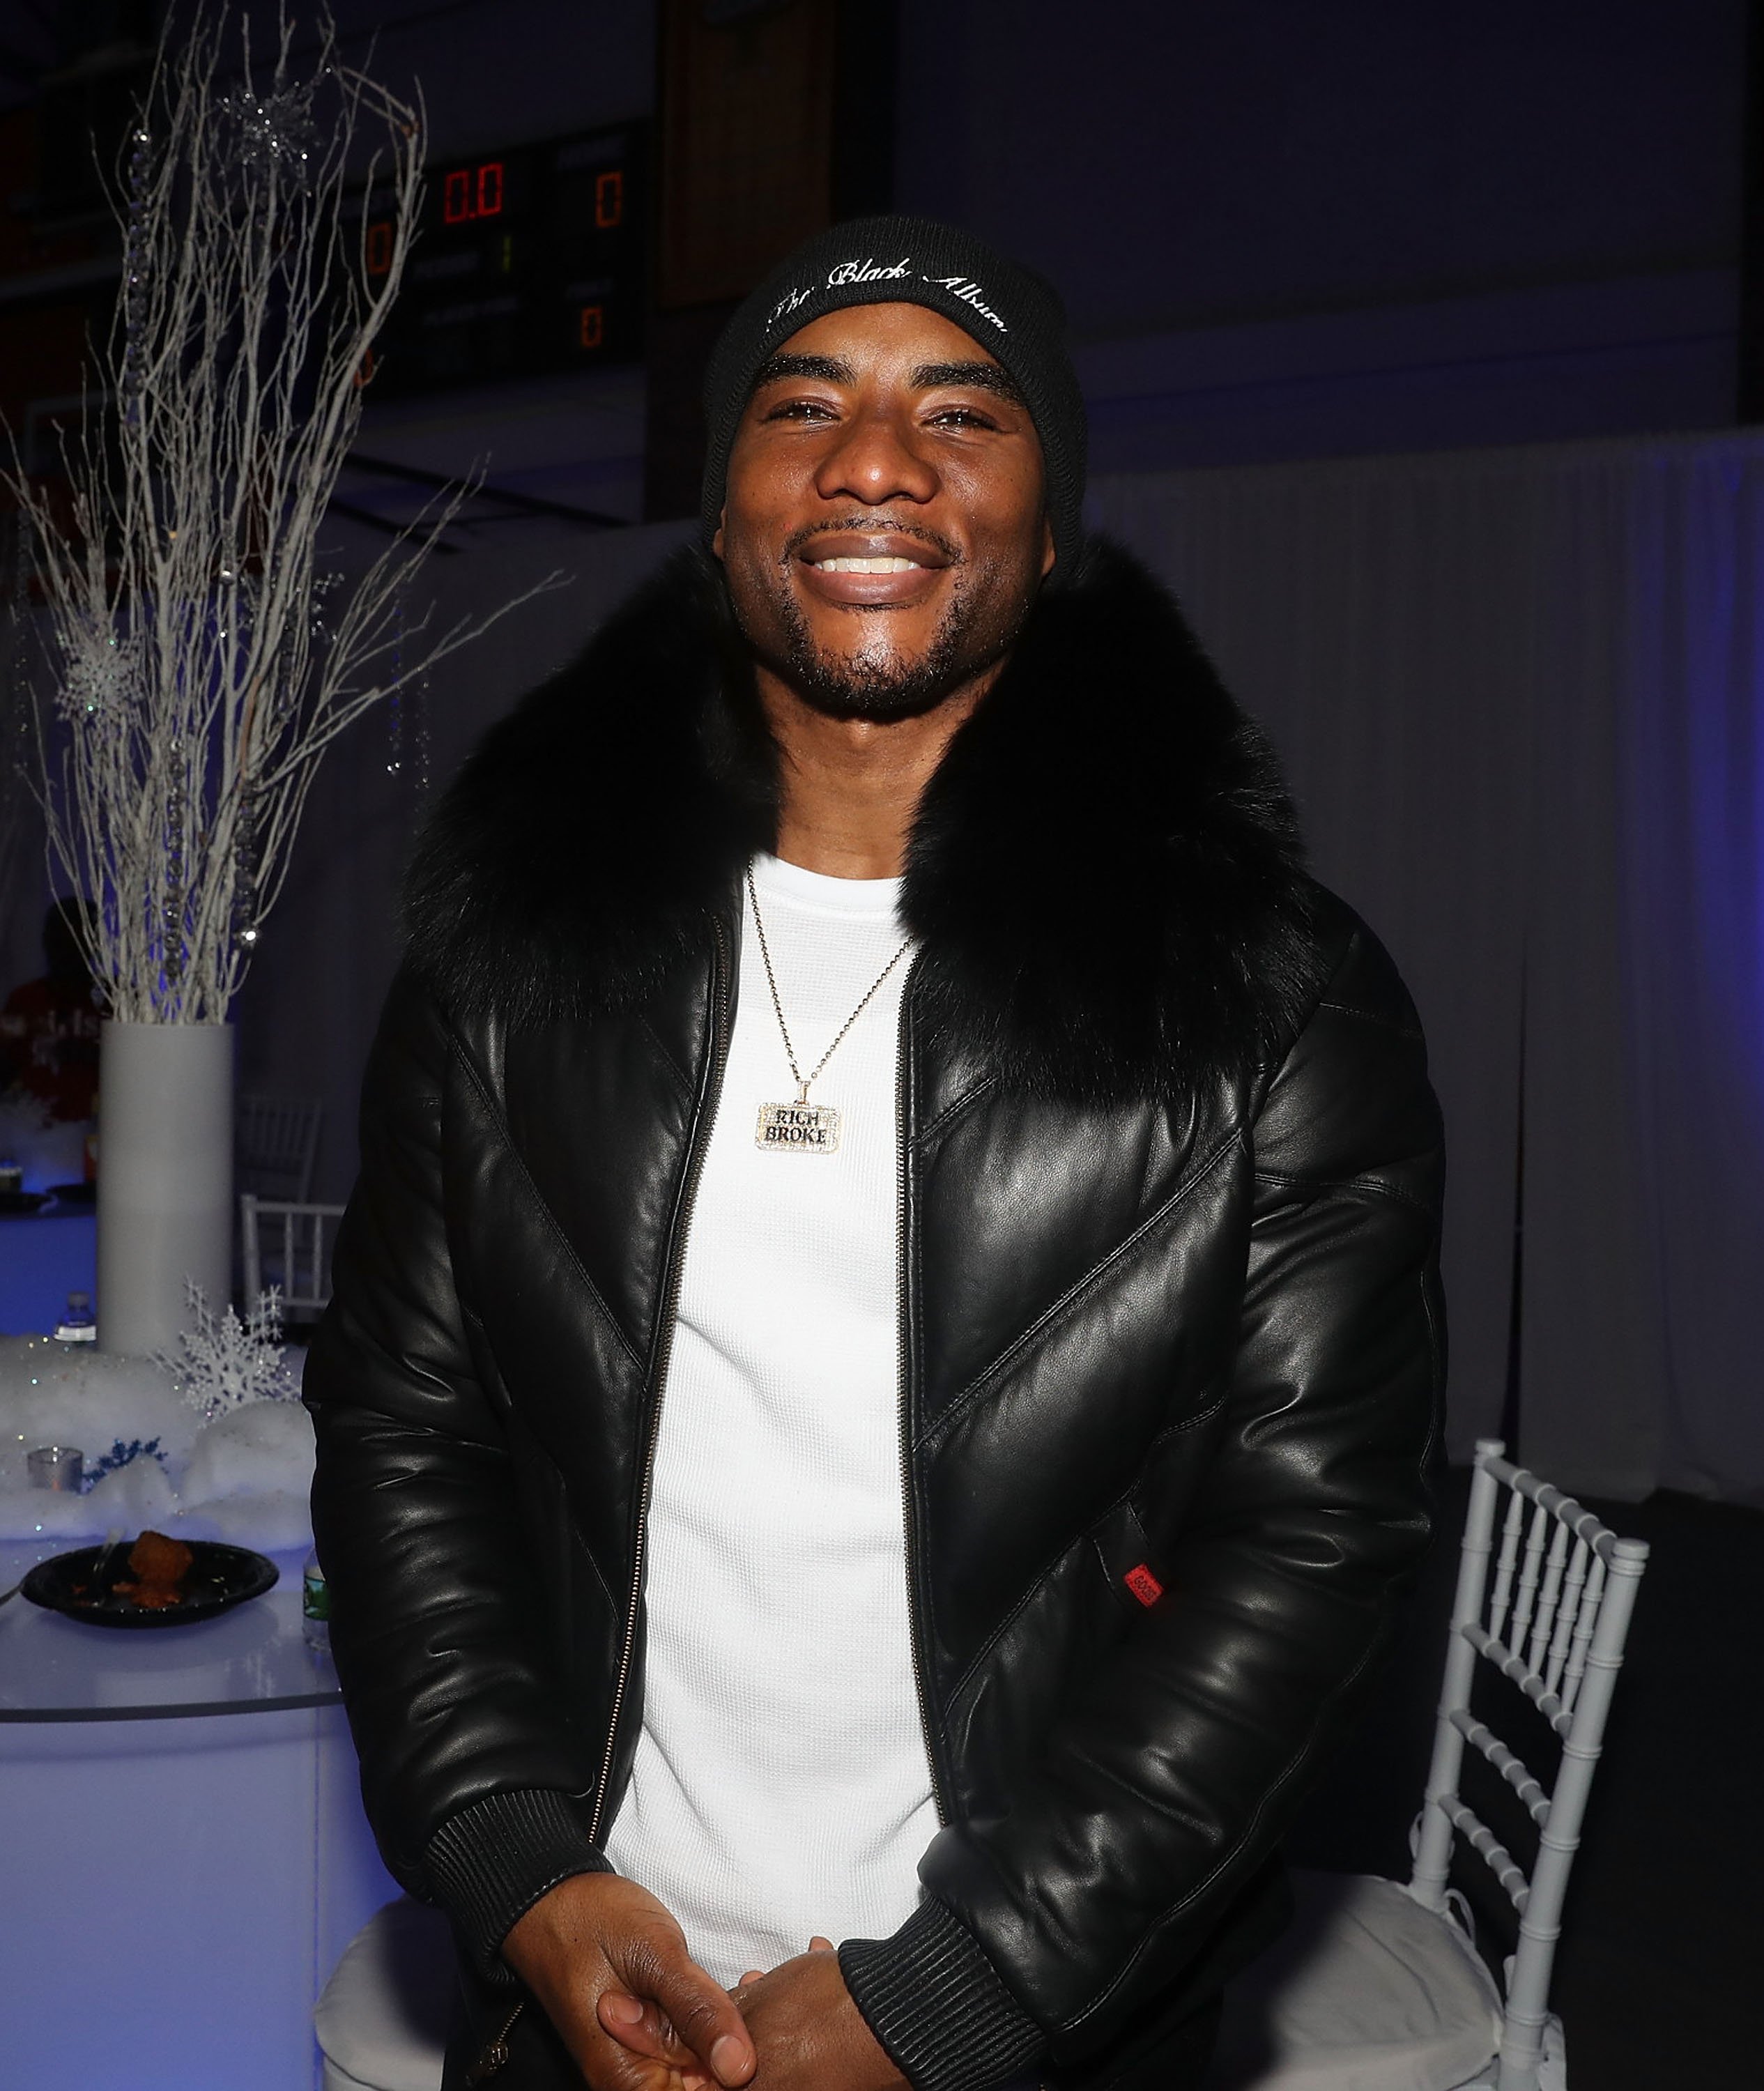 Radio personality Charlamagne Tha God at a charity event in 2018. | Photo: Getty Images